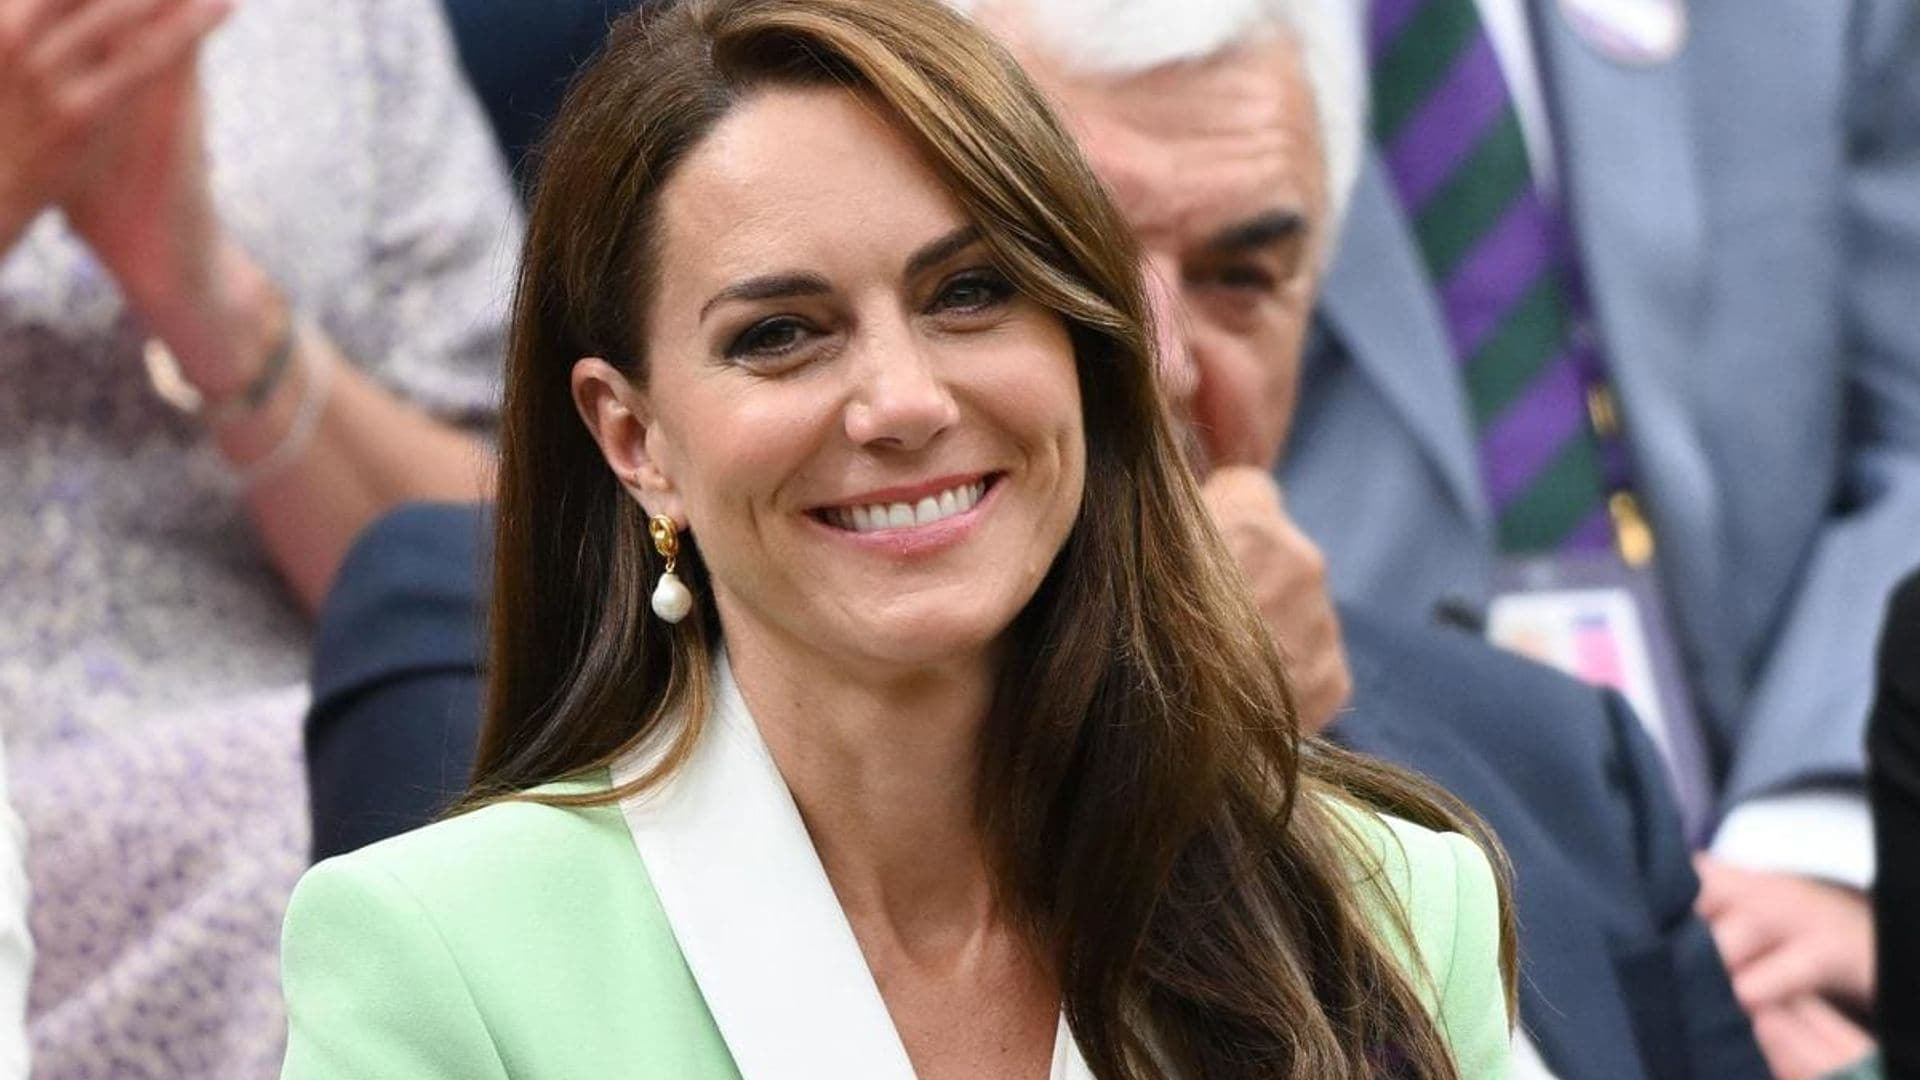 The Princess of Wales joined by special guest in royal box at Wimbledon